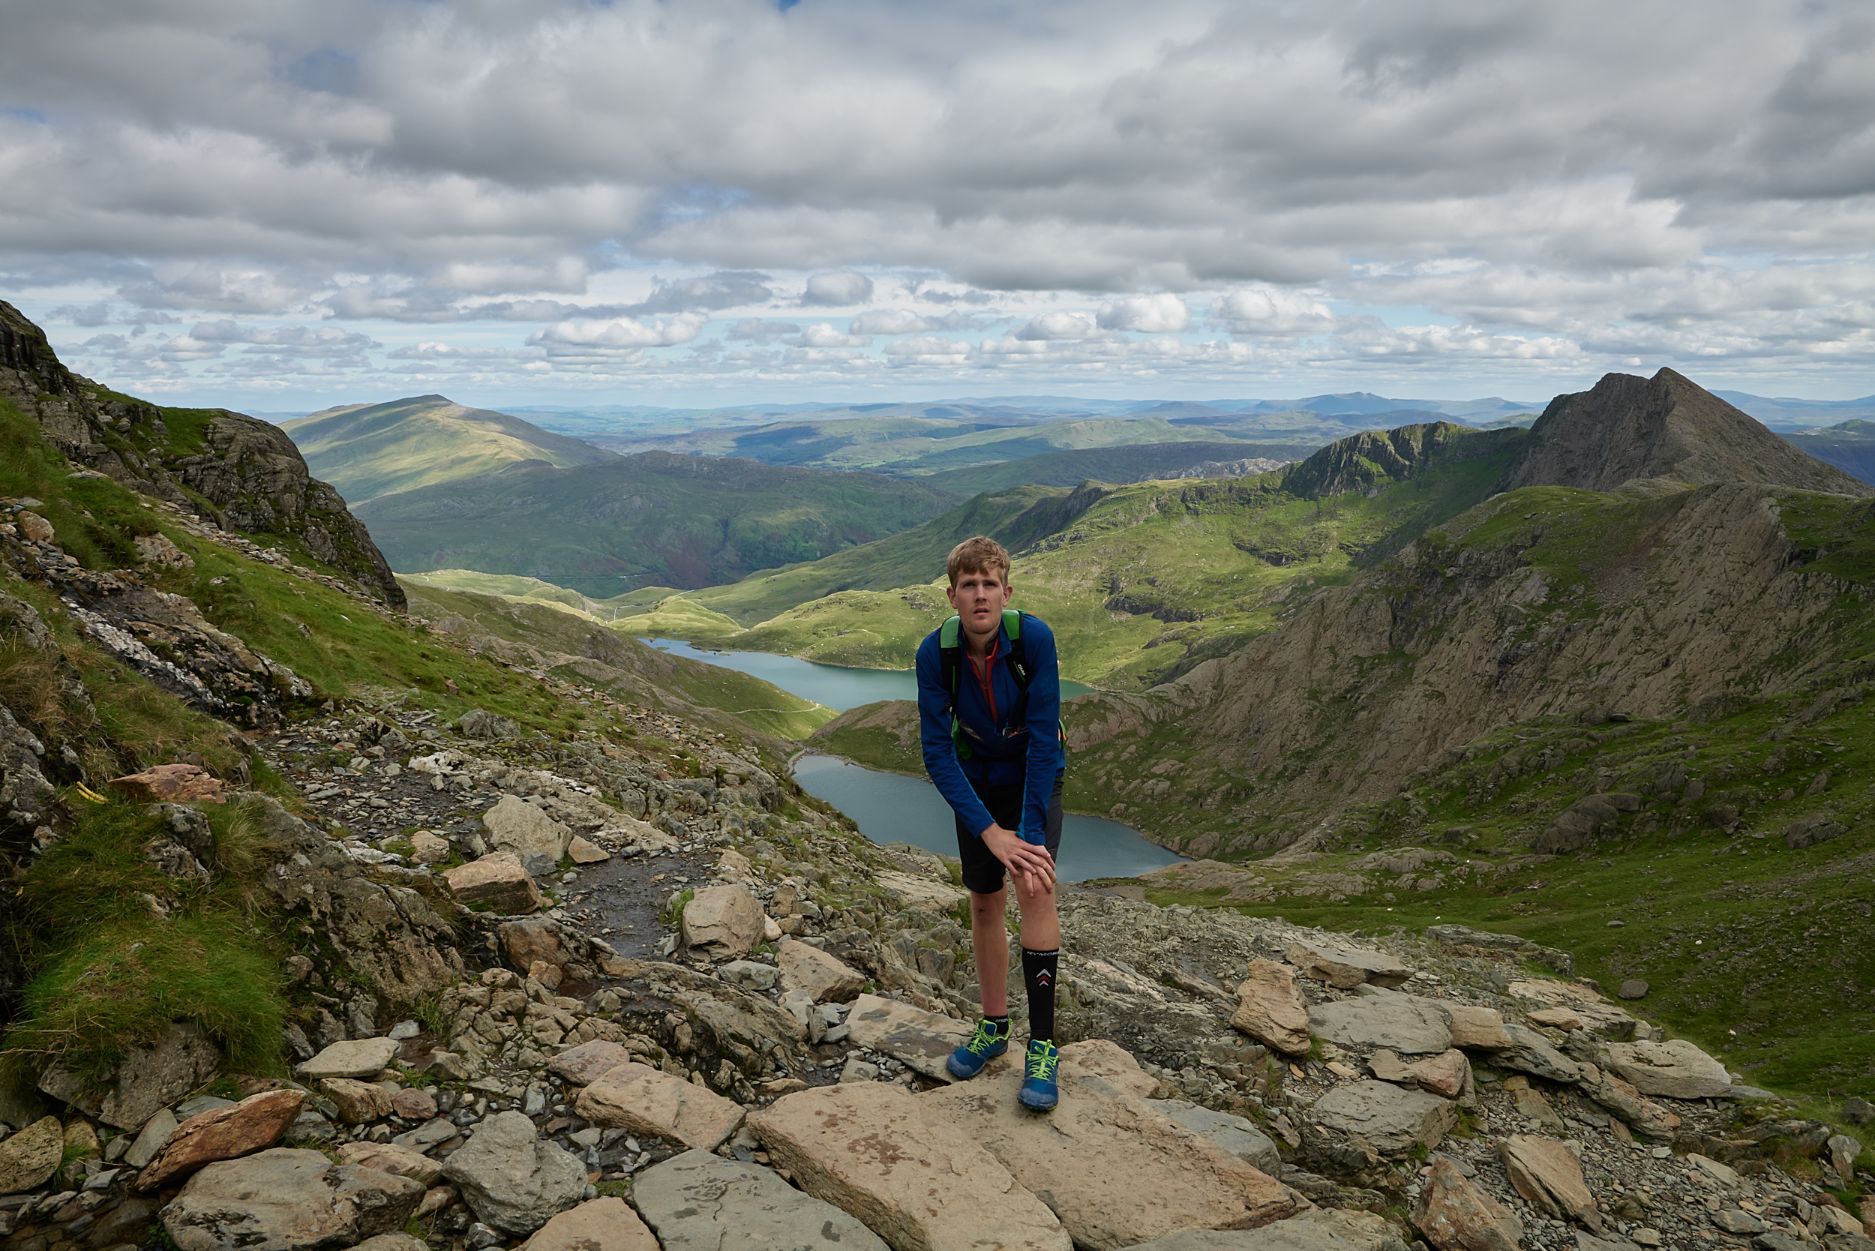 Alex Staniforth on a climb up Snowdon, the highest mountain in Wales. Credit: Jonathan Davies